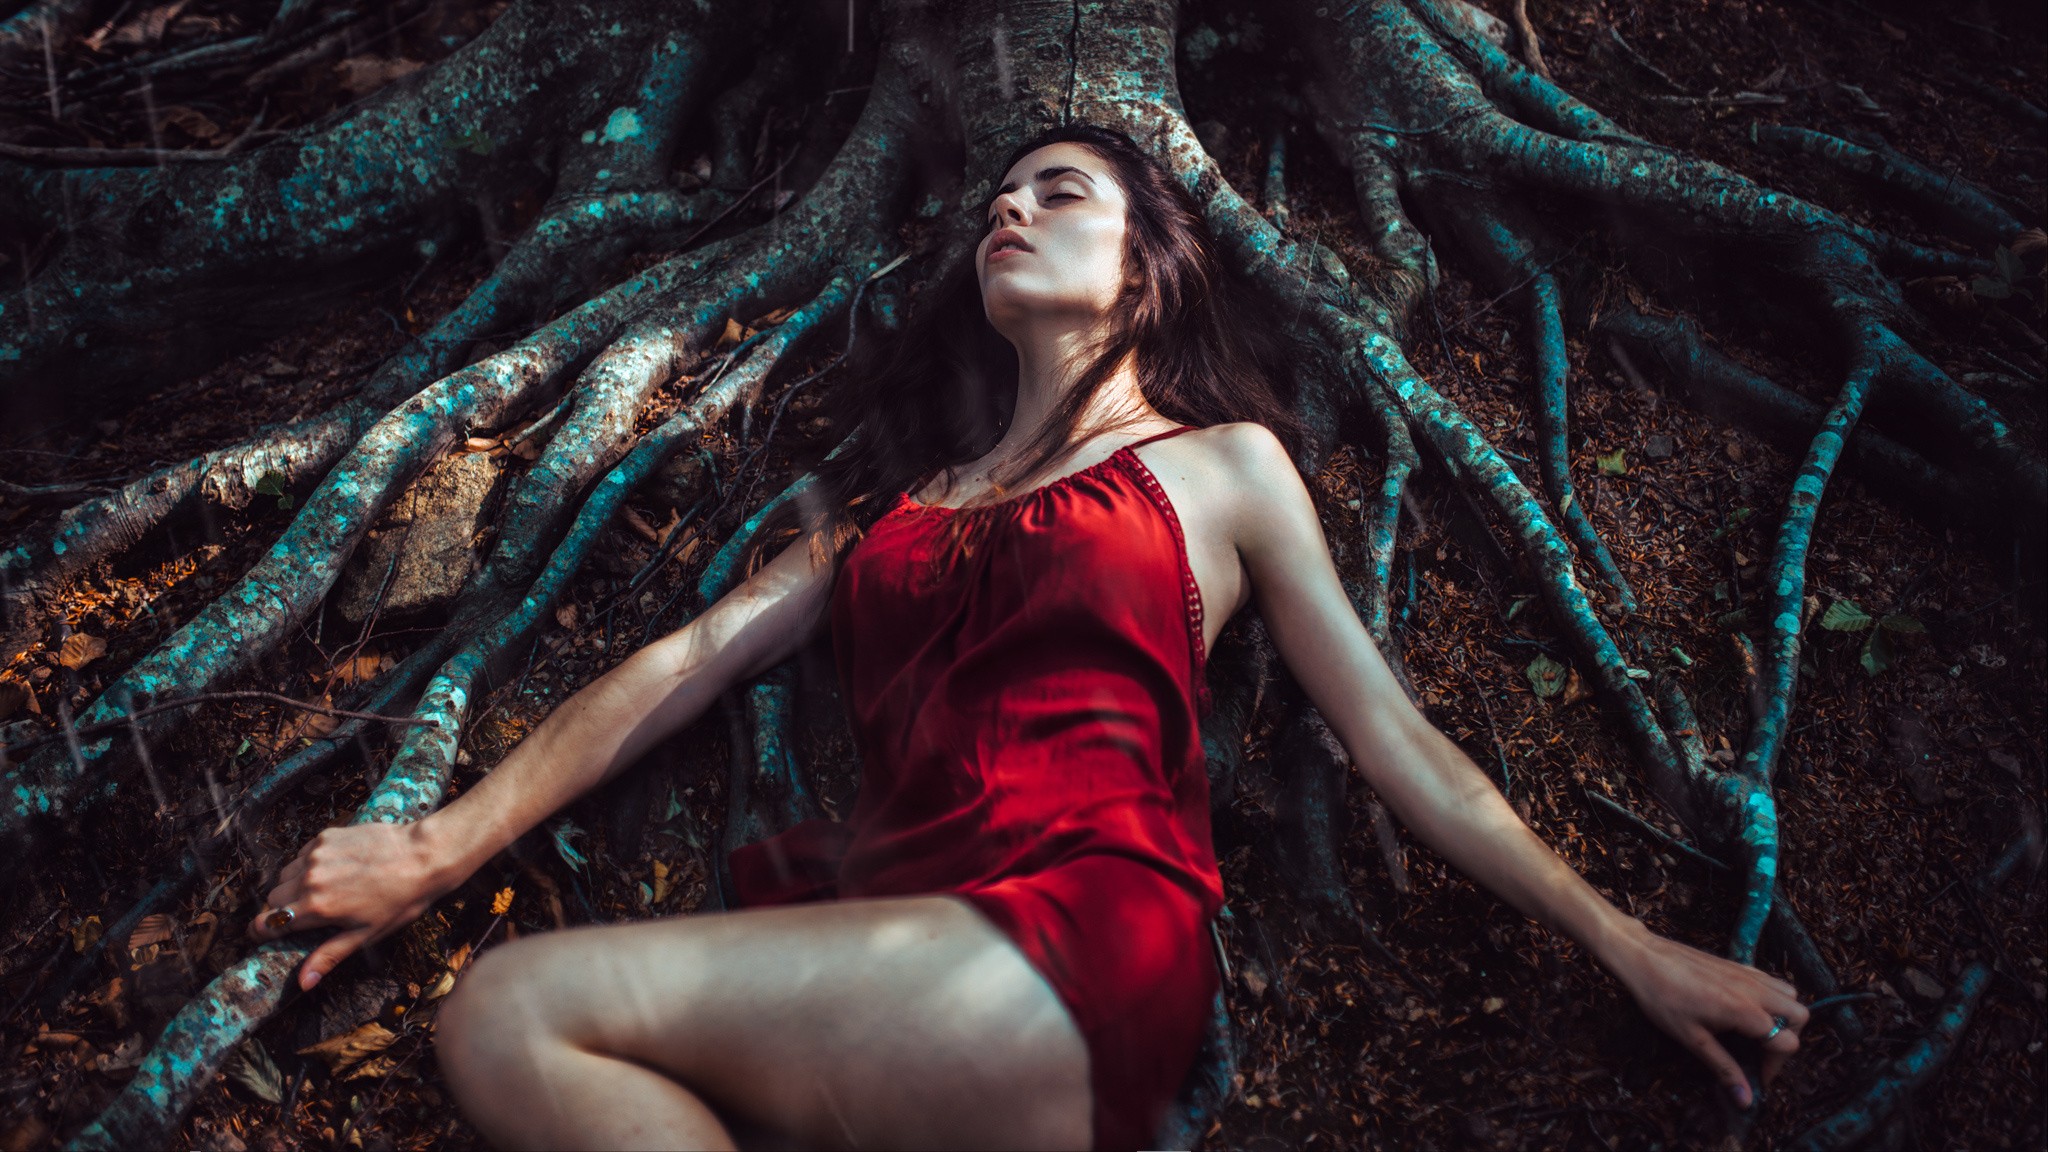 Women Model Gustavo Terzaghi Long Hair Brunette Dress Lying Down Roots Trees Legs Closed Eyes Red Dr 2048x1152